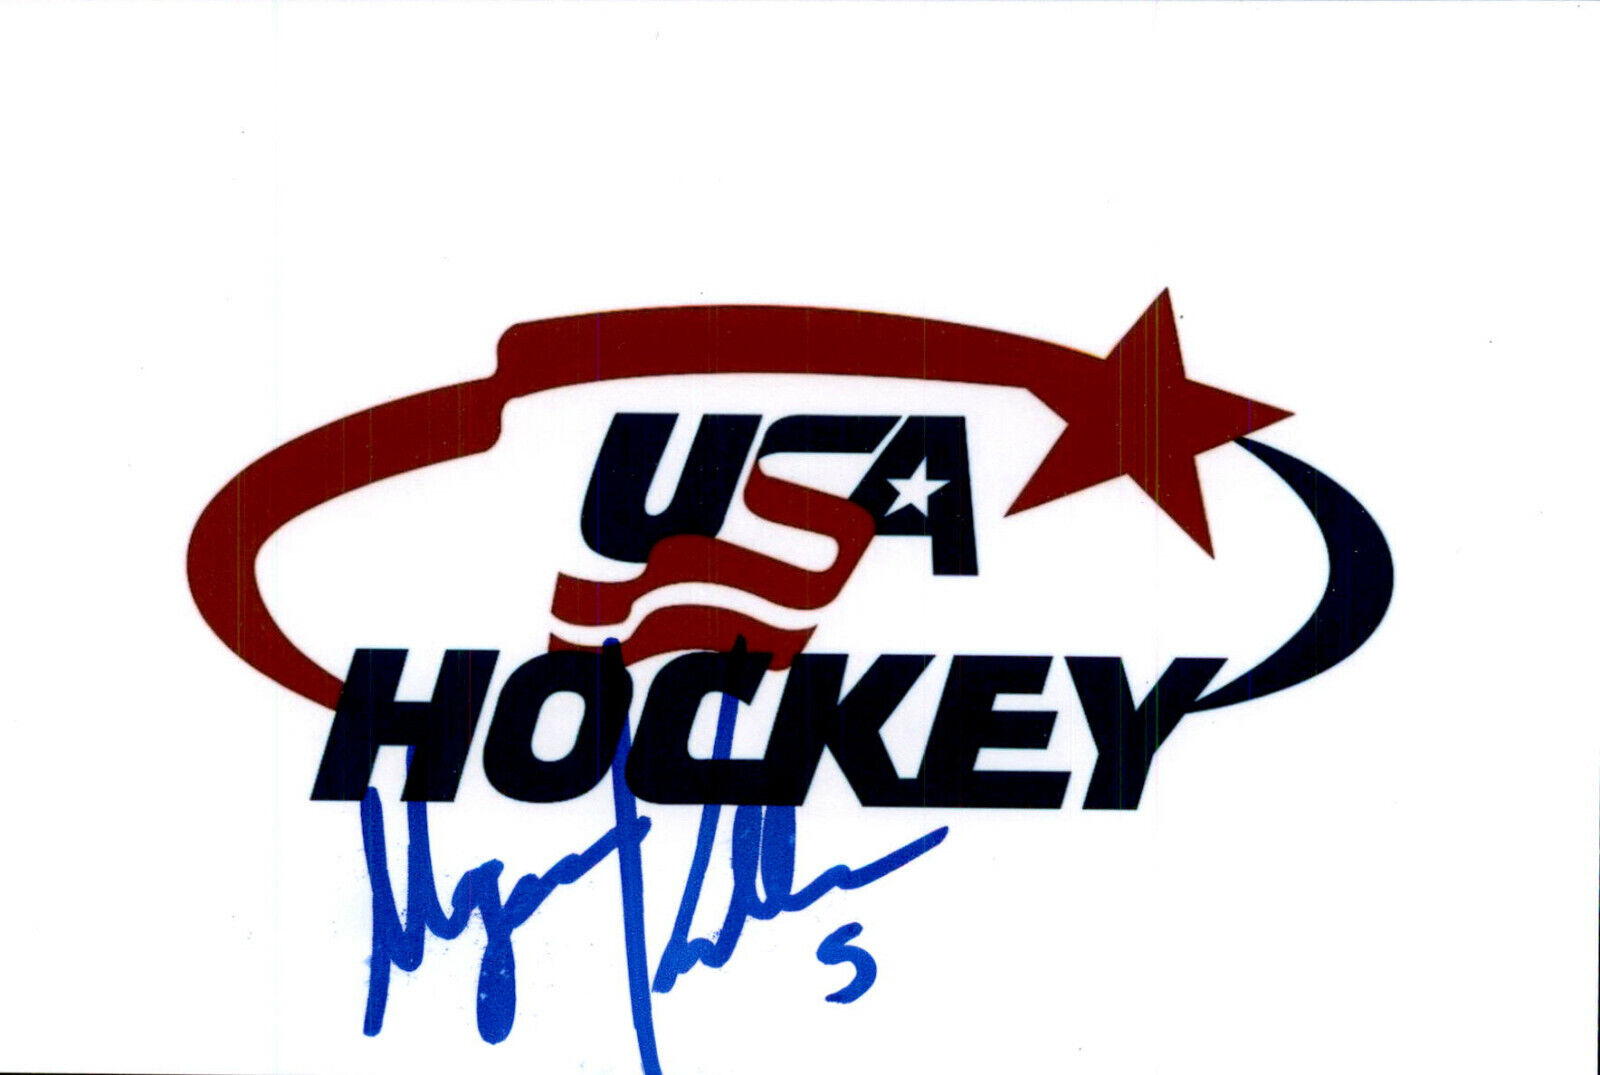 Megan Keller SIGNED autographed 4x6 Photo Poster painting TEAM USA WOMENS HOCKEY #2